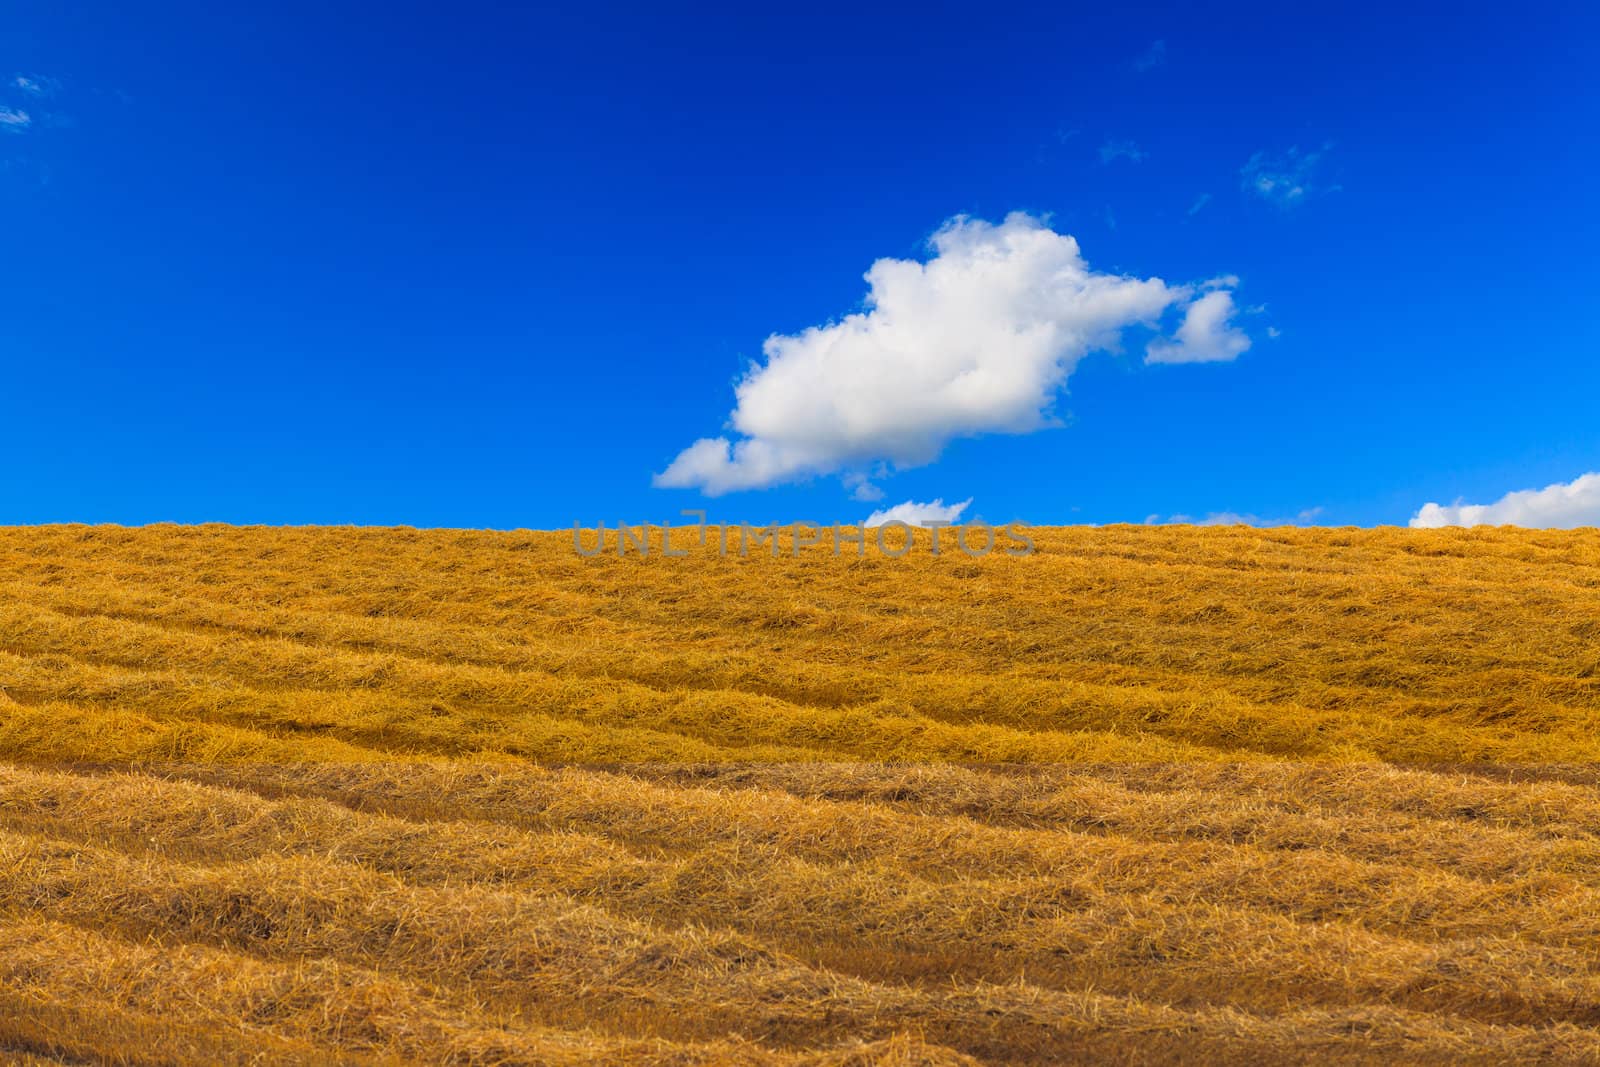 Wheat field and blue sky with clouds  by thanomphong